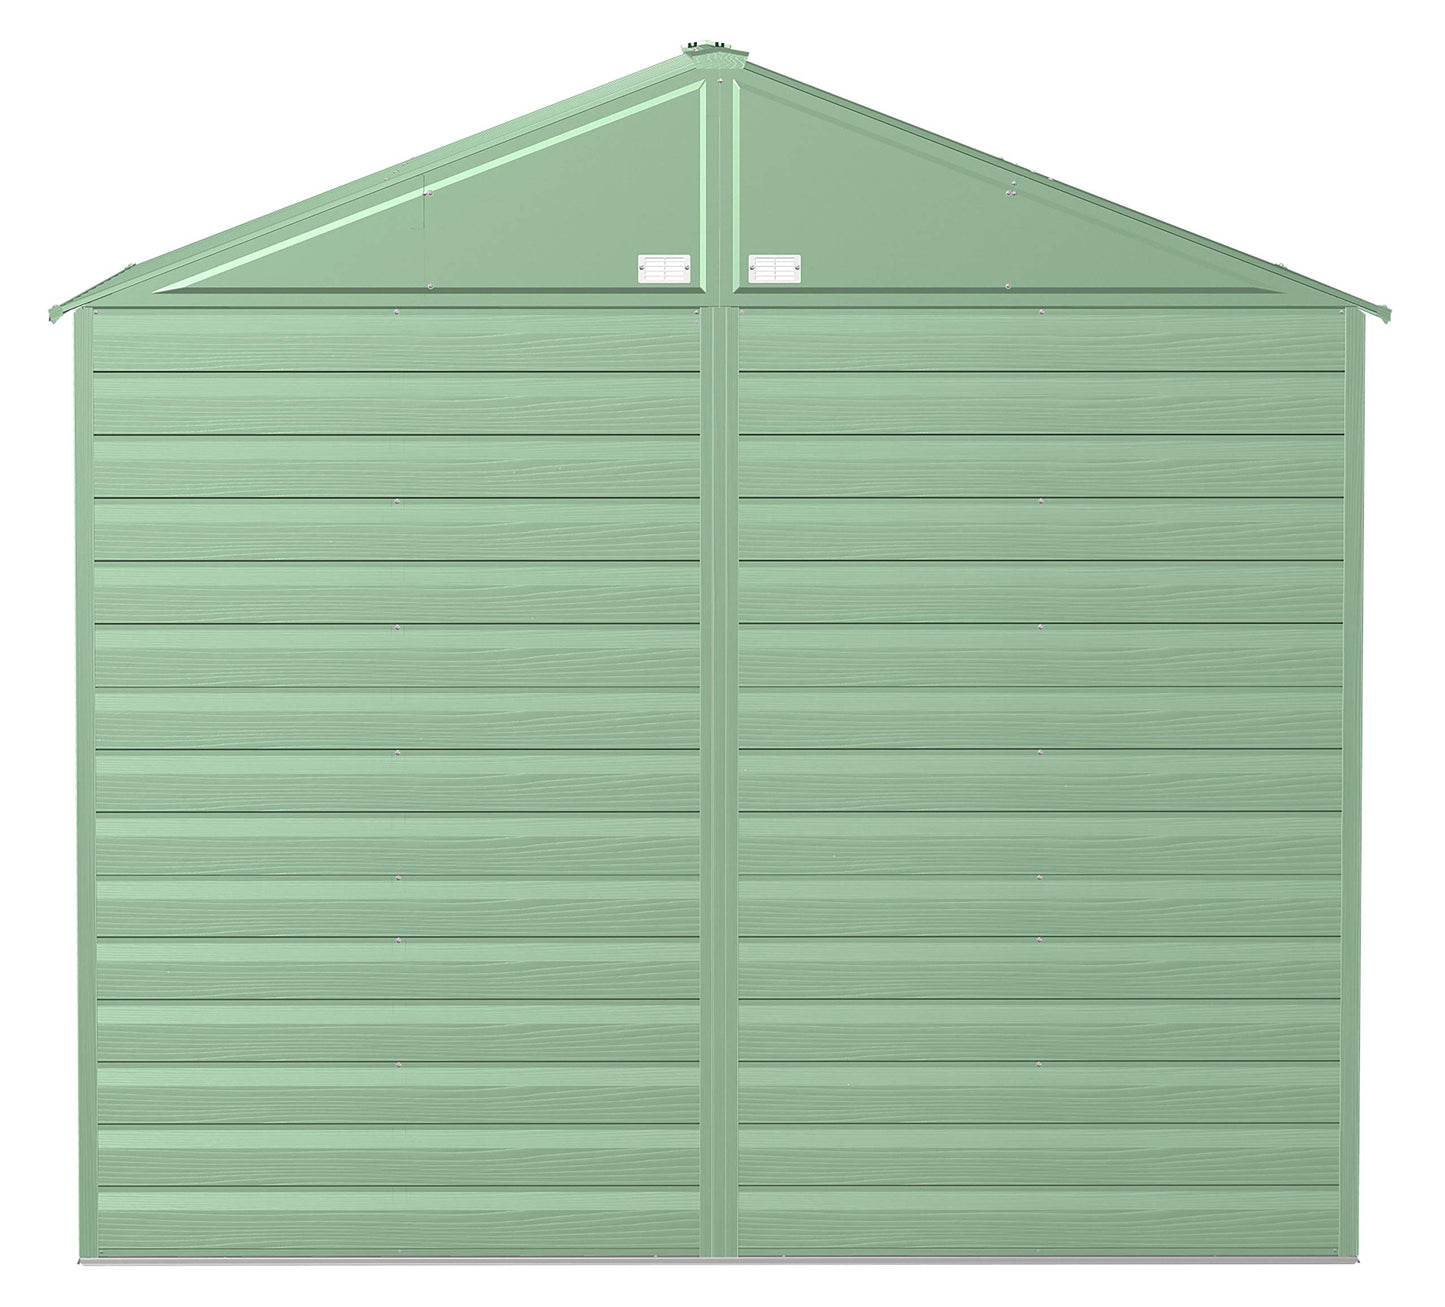 Arrow Shed Select 8' x 8' Outdoor Lockable Steel Storage Shed Building, Sage Green